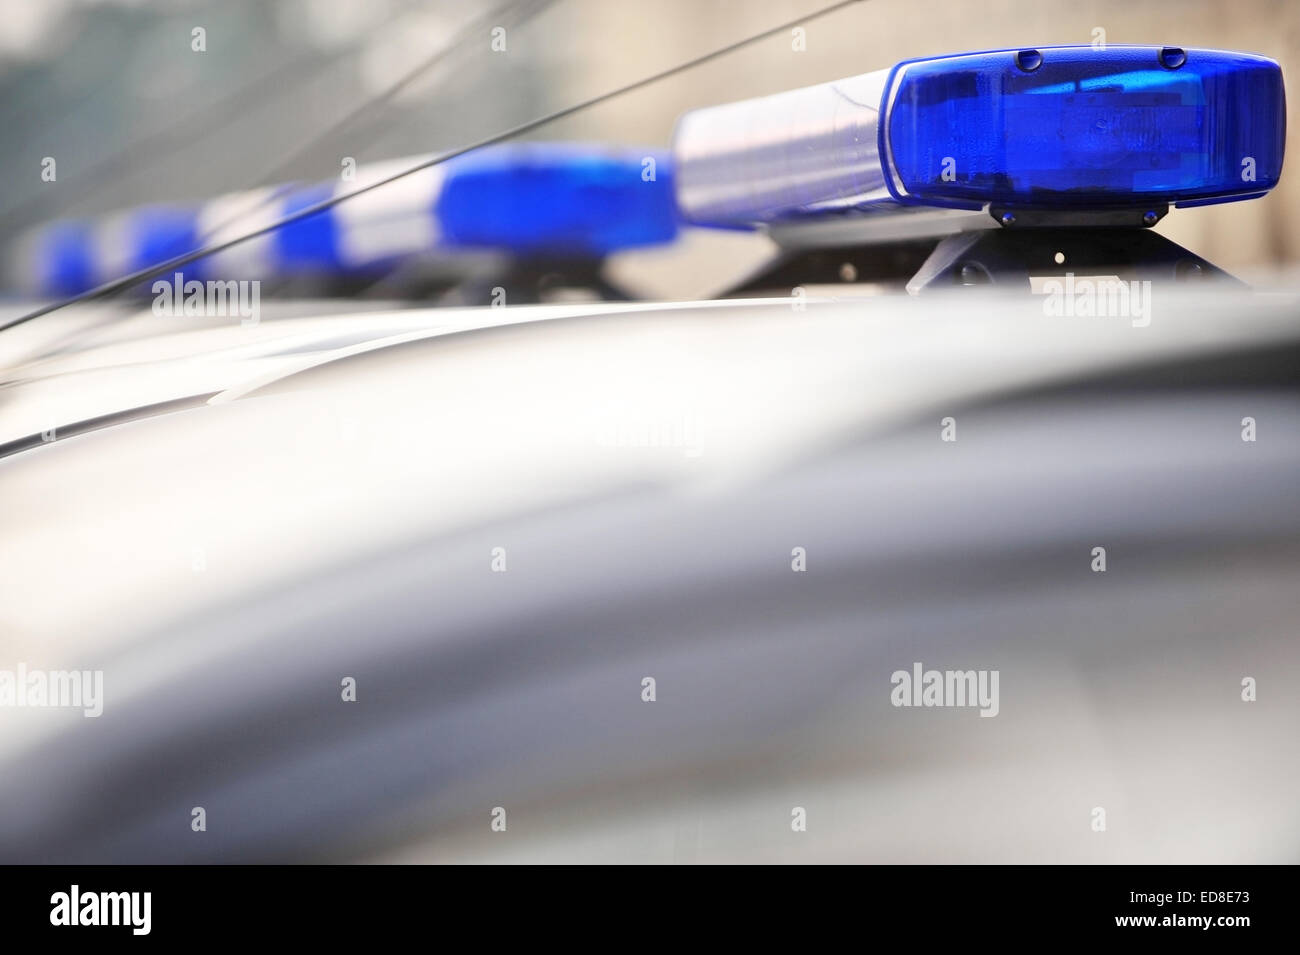 Detail with police blue siren lights on a car Stock Photo